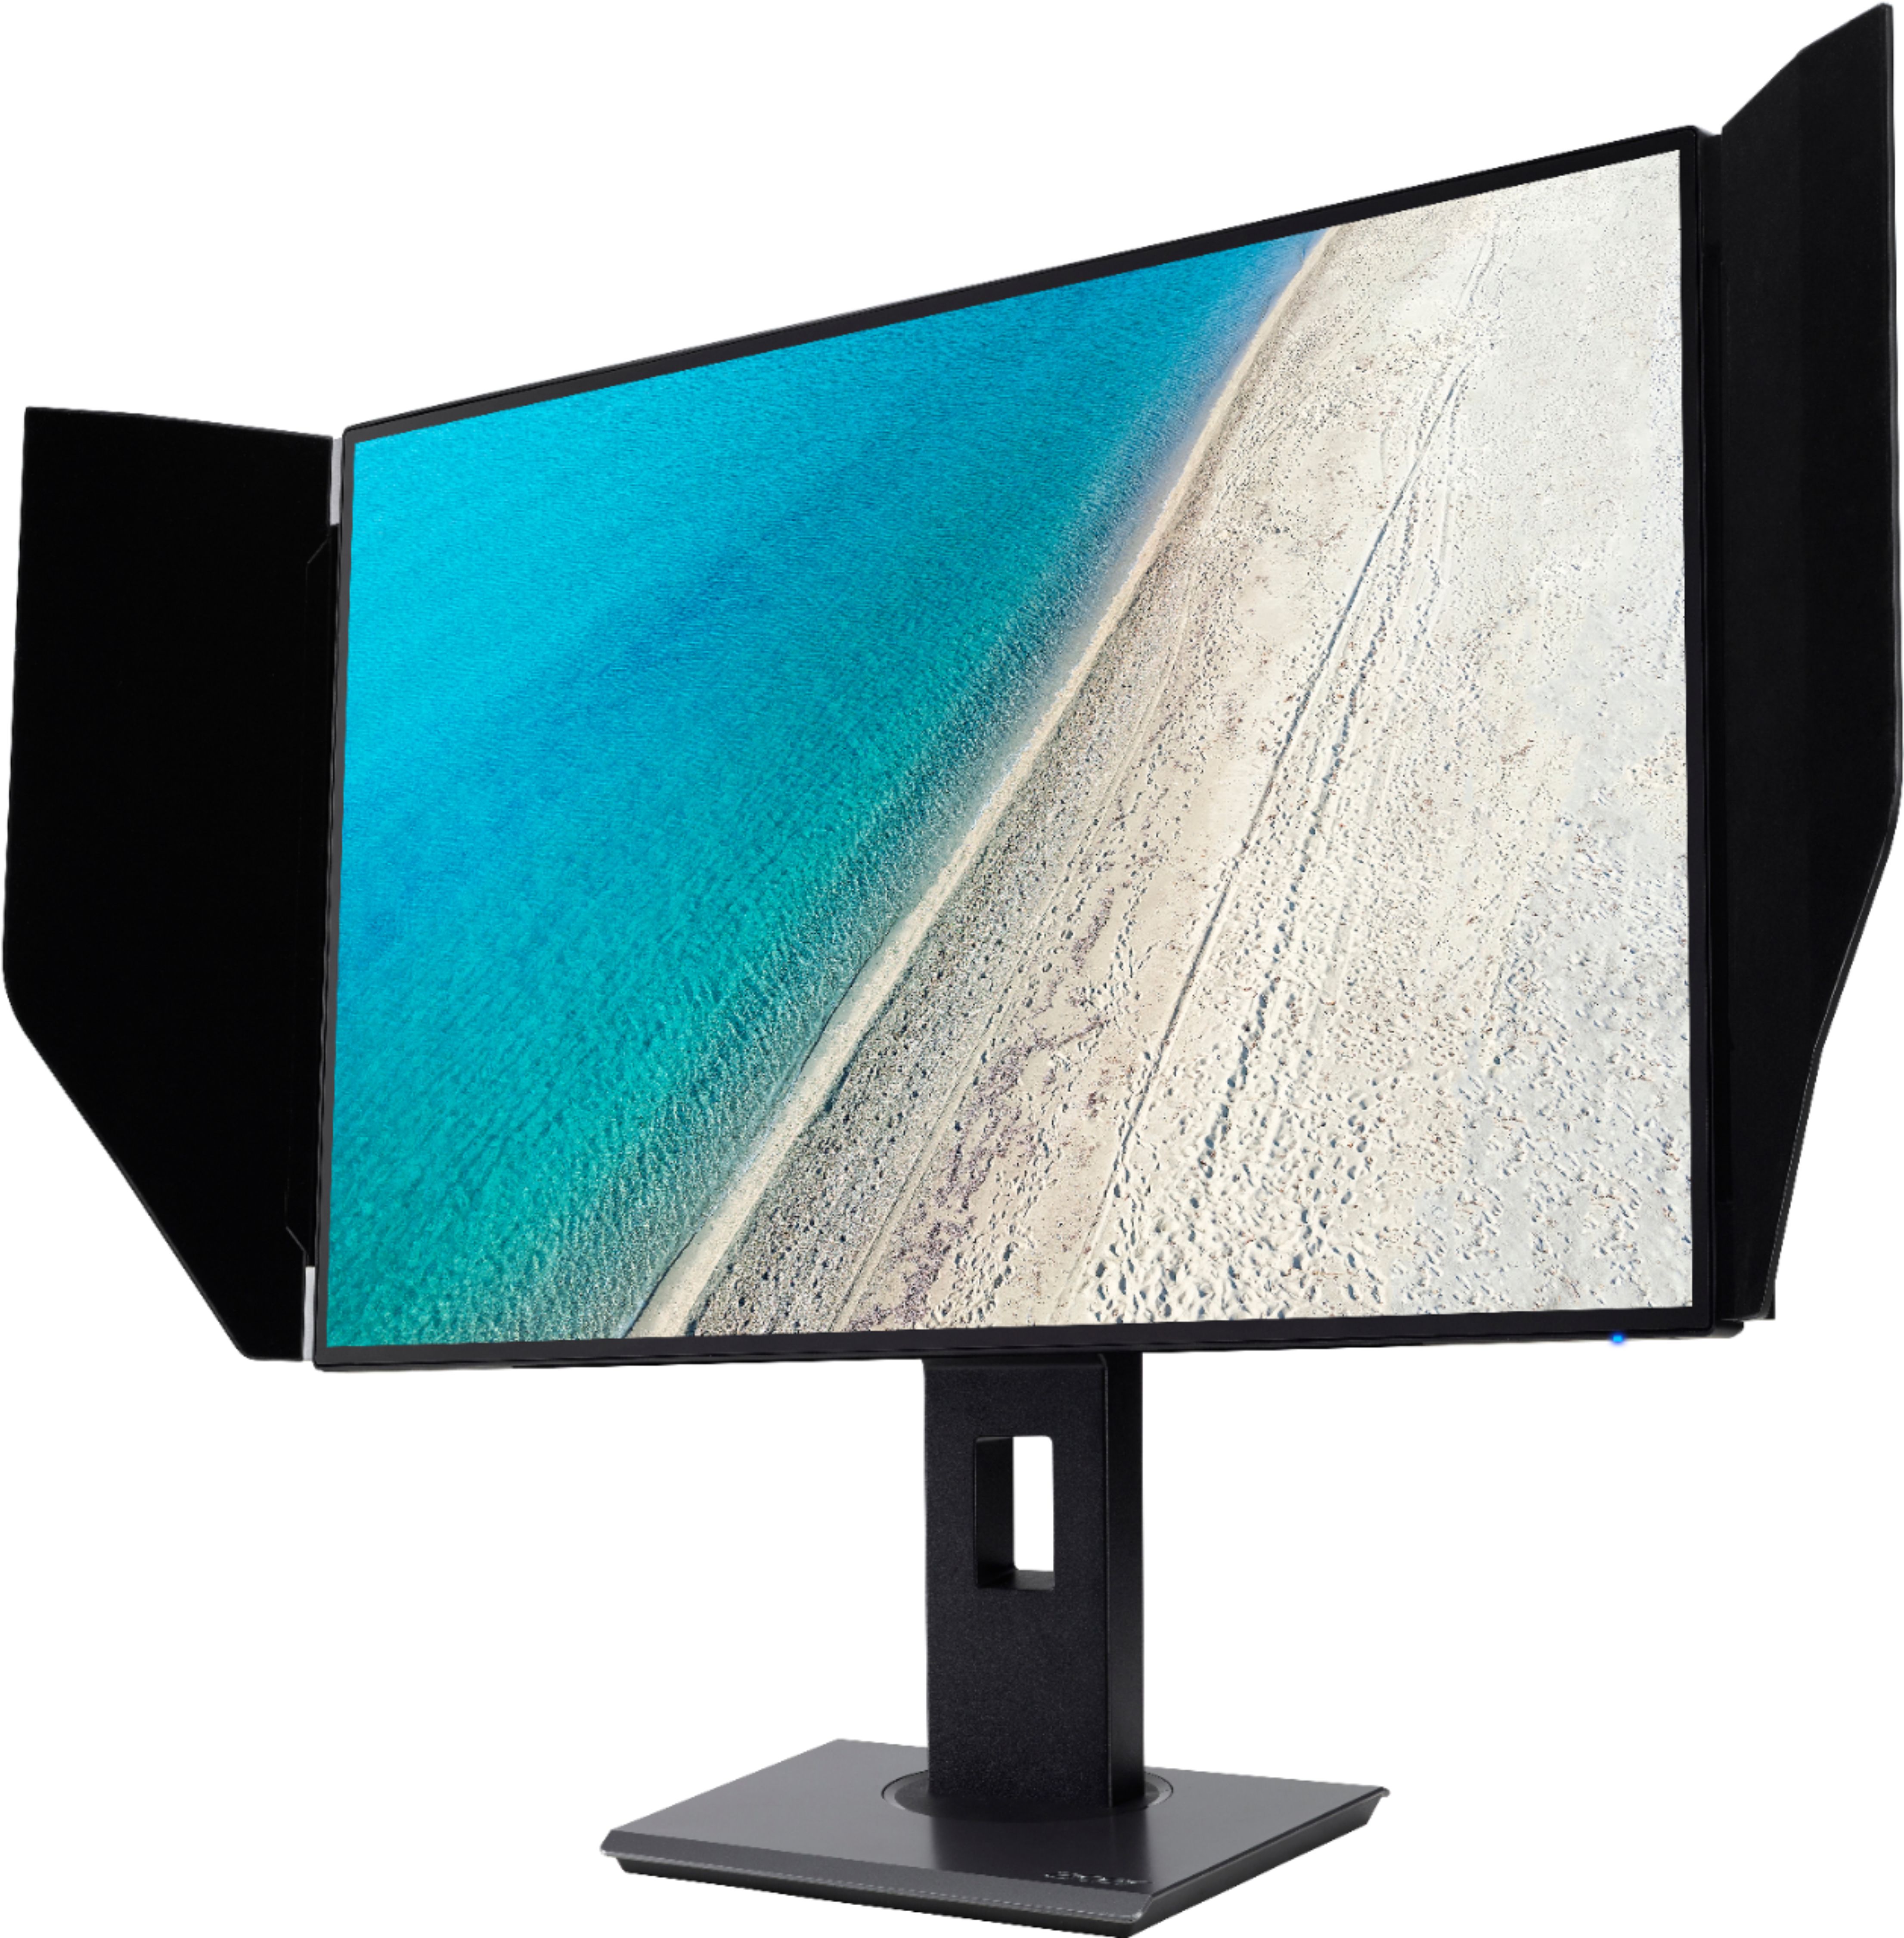 Left View: Acer B7 23.8" Widescreen Monitor Display Full HD (1920x1080) 4 ms GTG 16:9 75 Hz